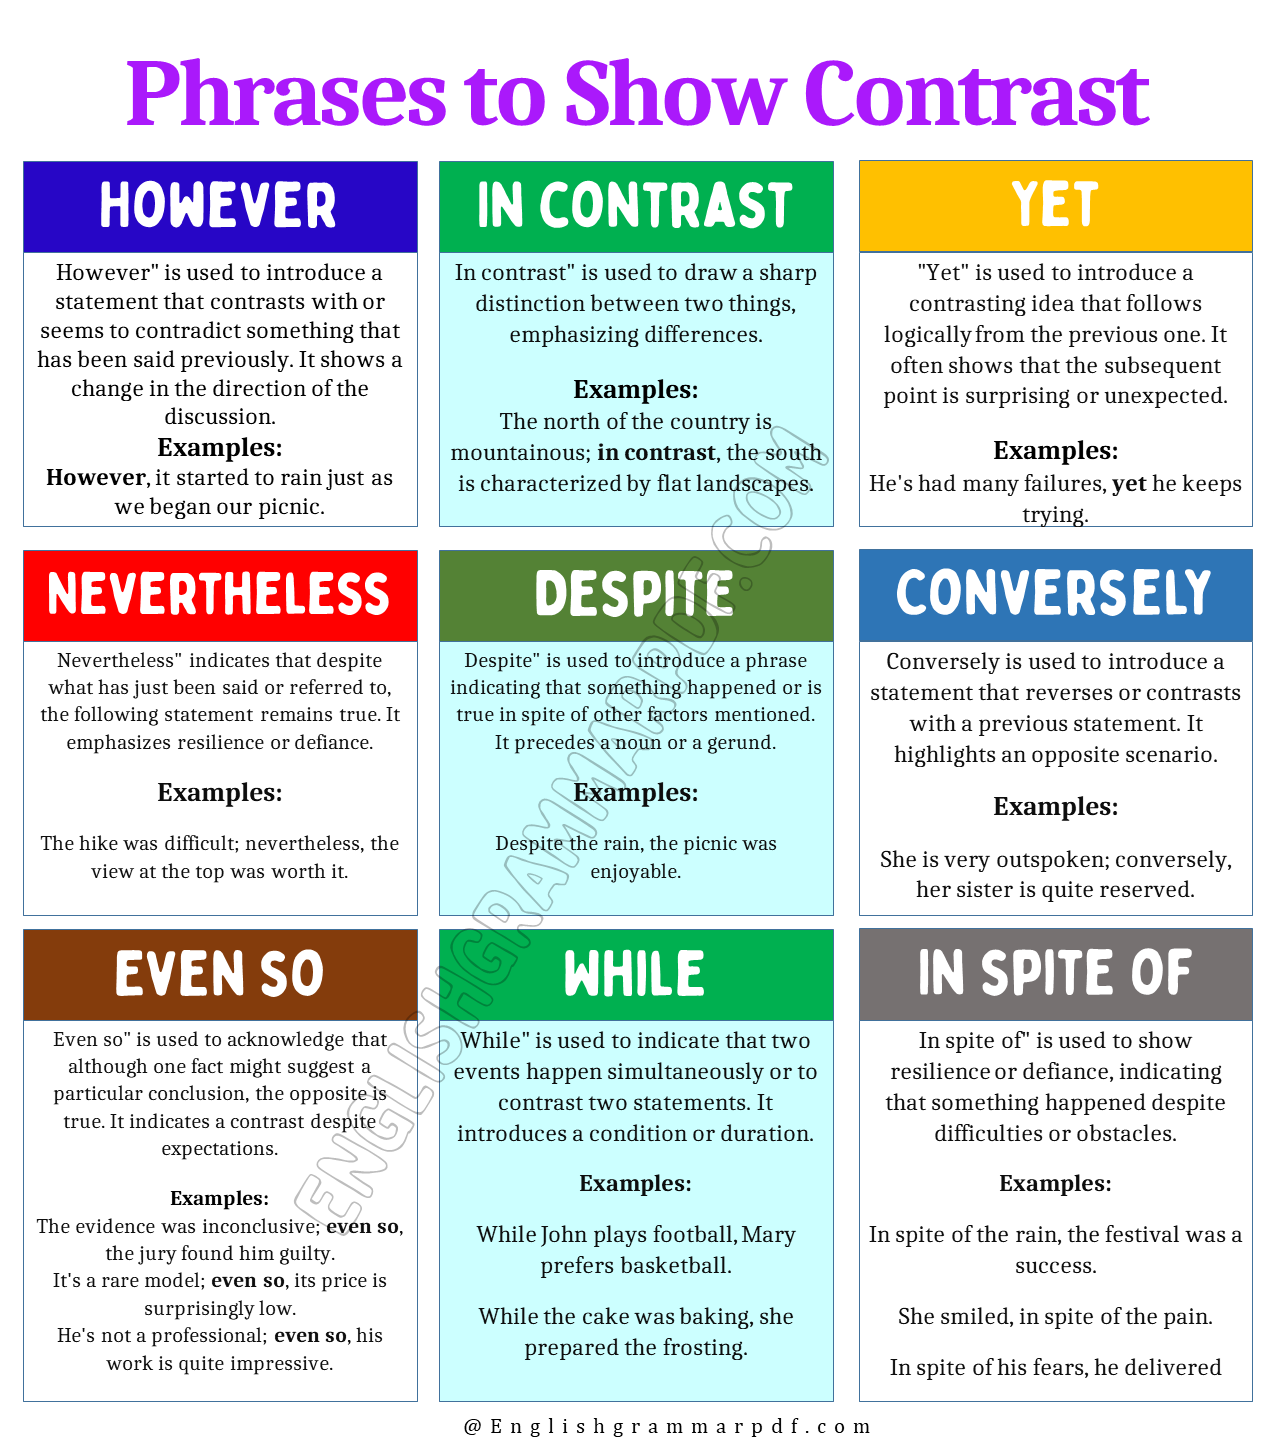 Phrases to Show Contrast